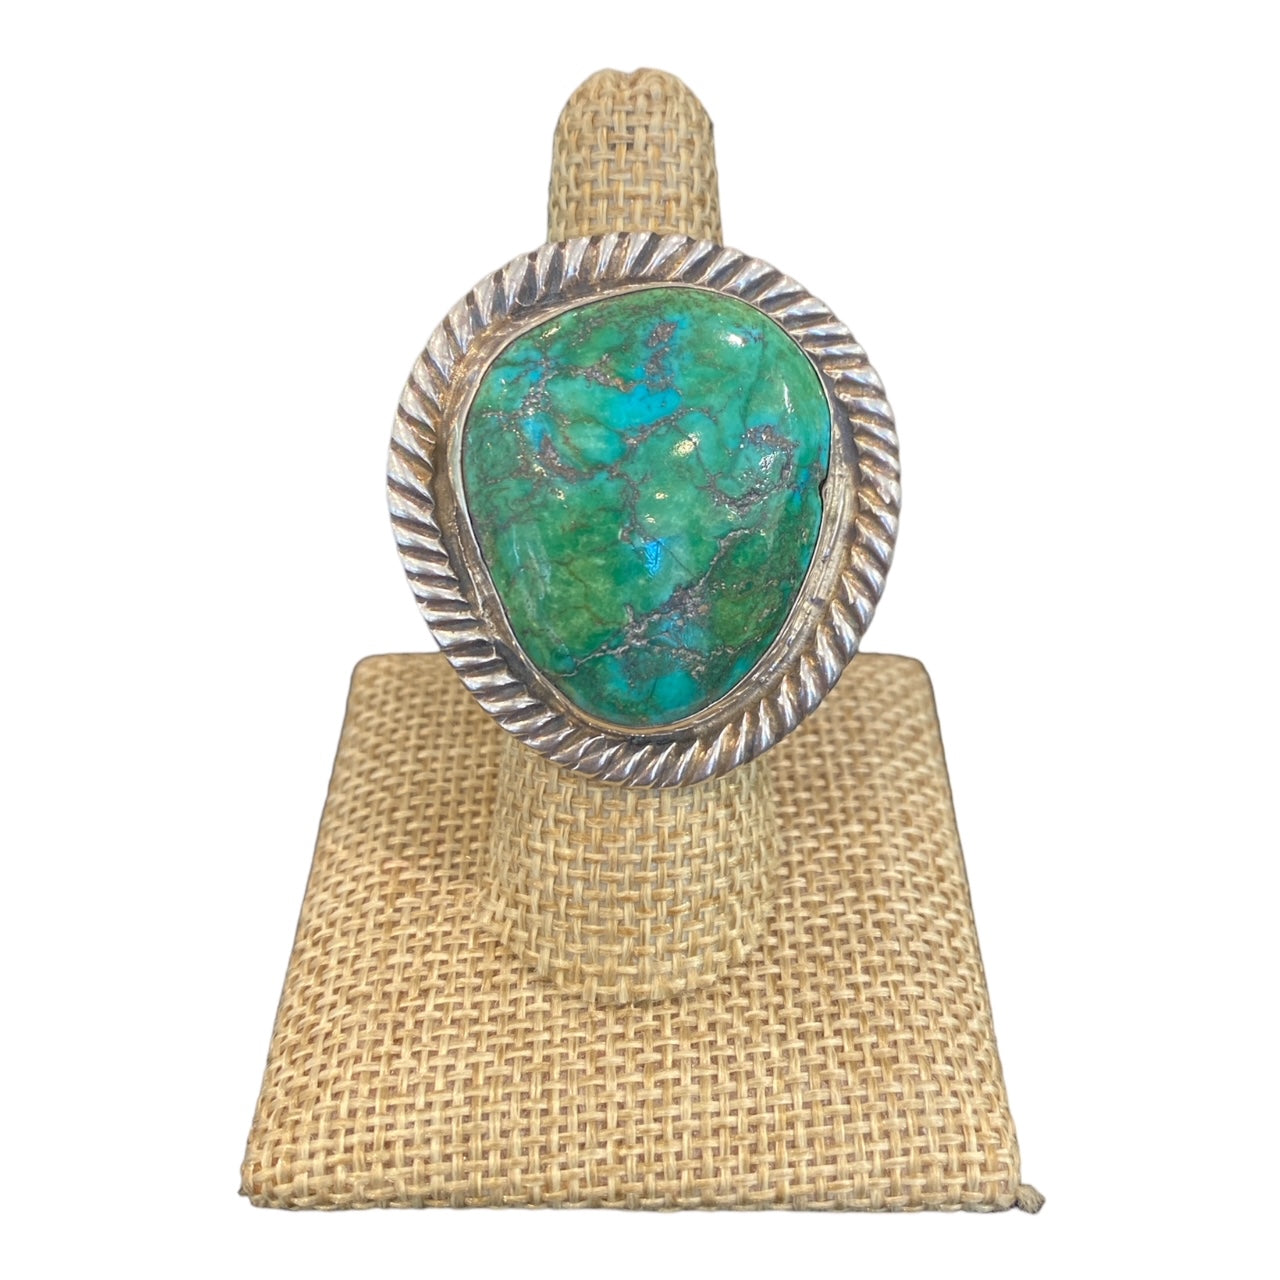 Vintage James Taylor Navajo Turquoise Ring, sterling silver, jewelry, telluride 